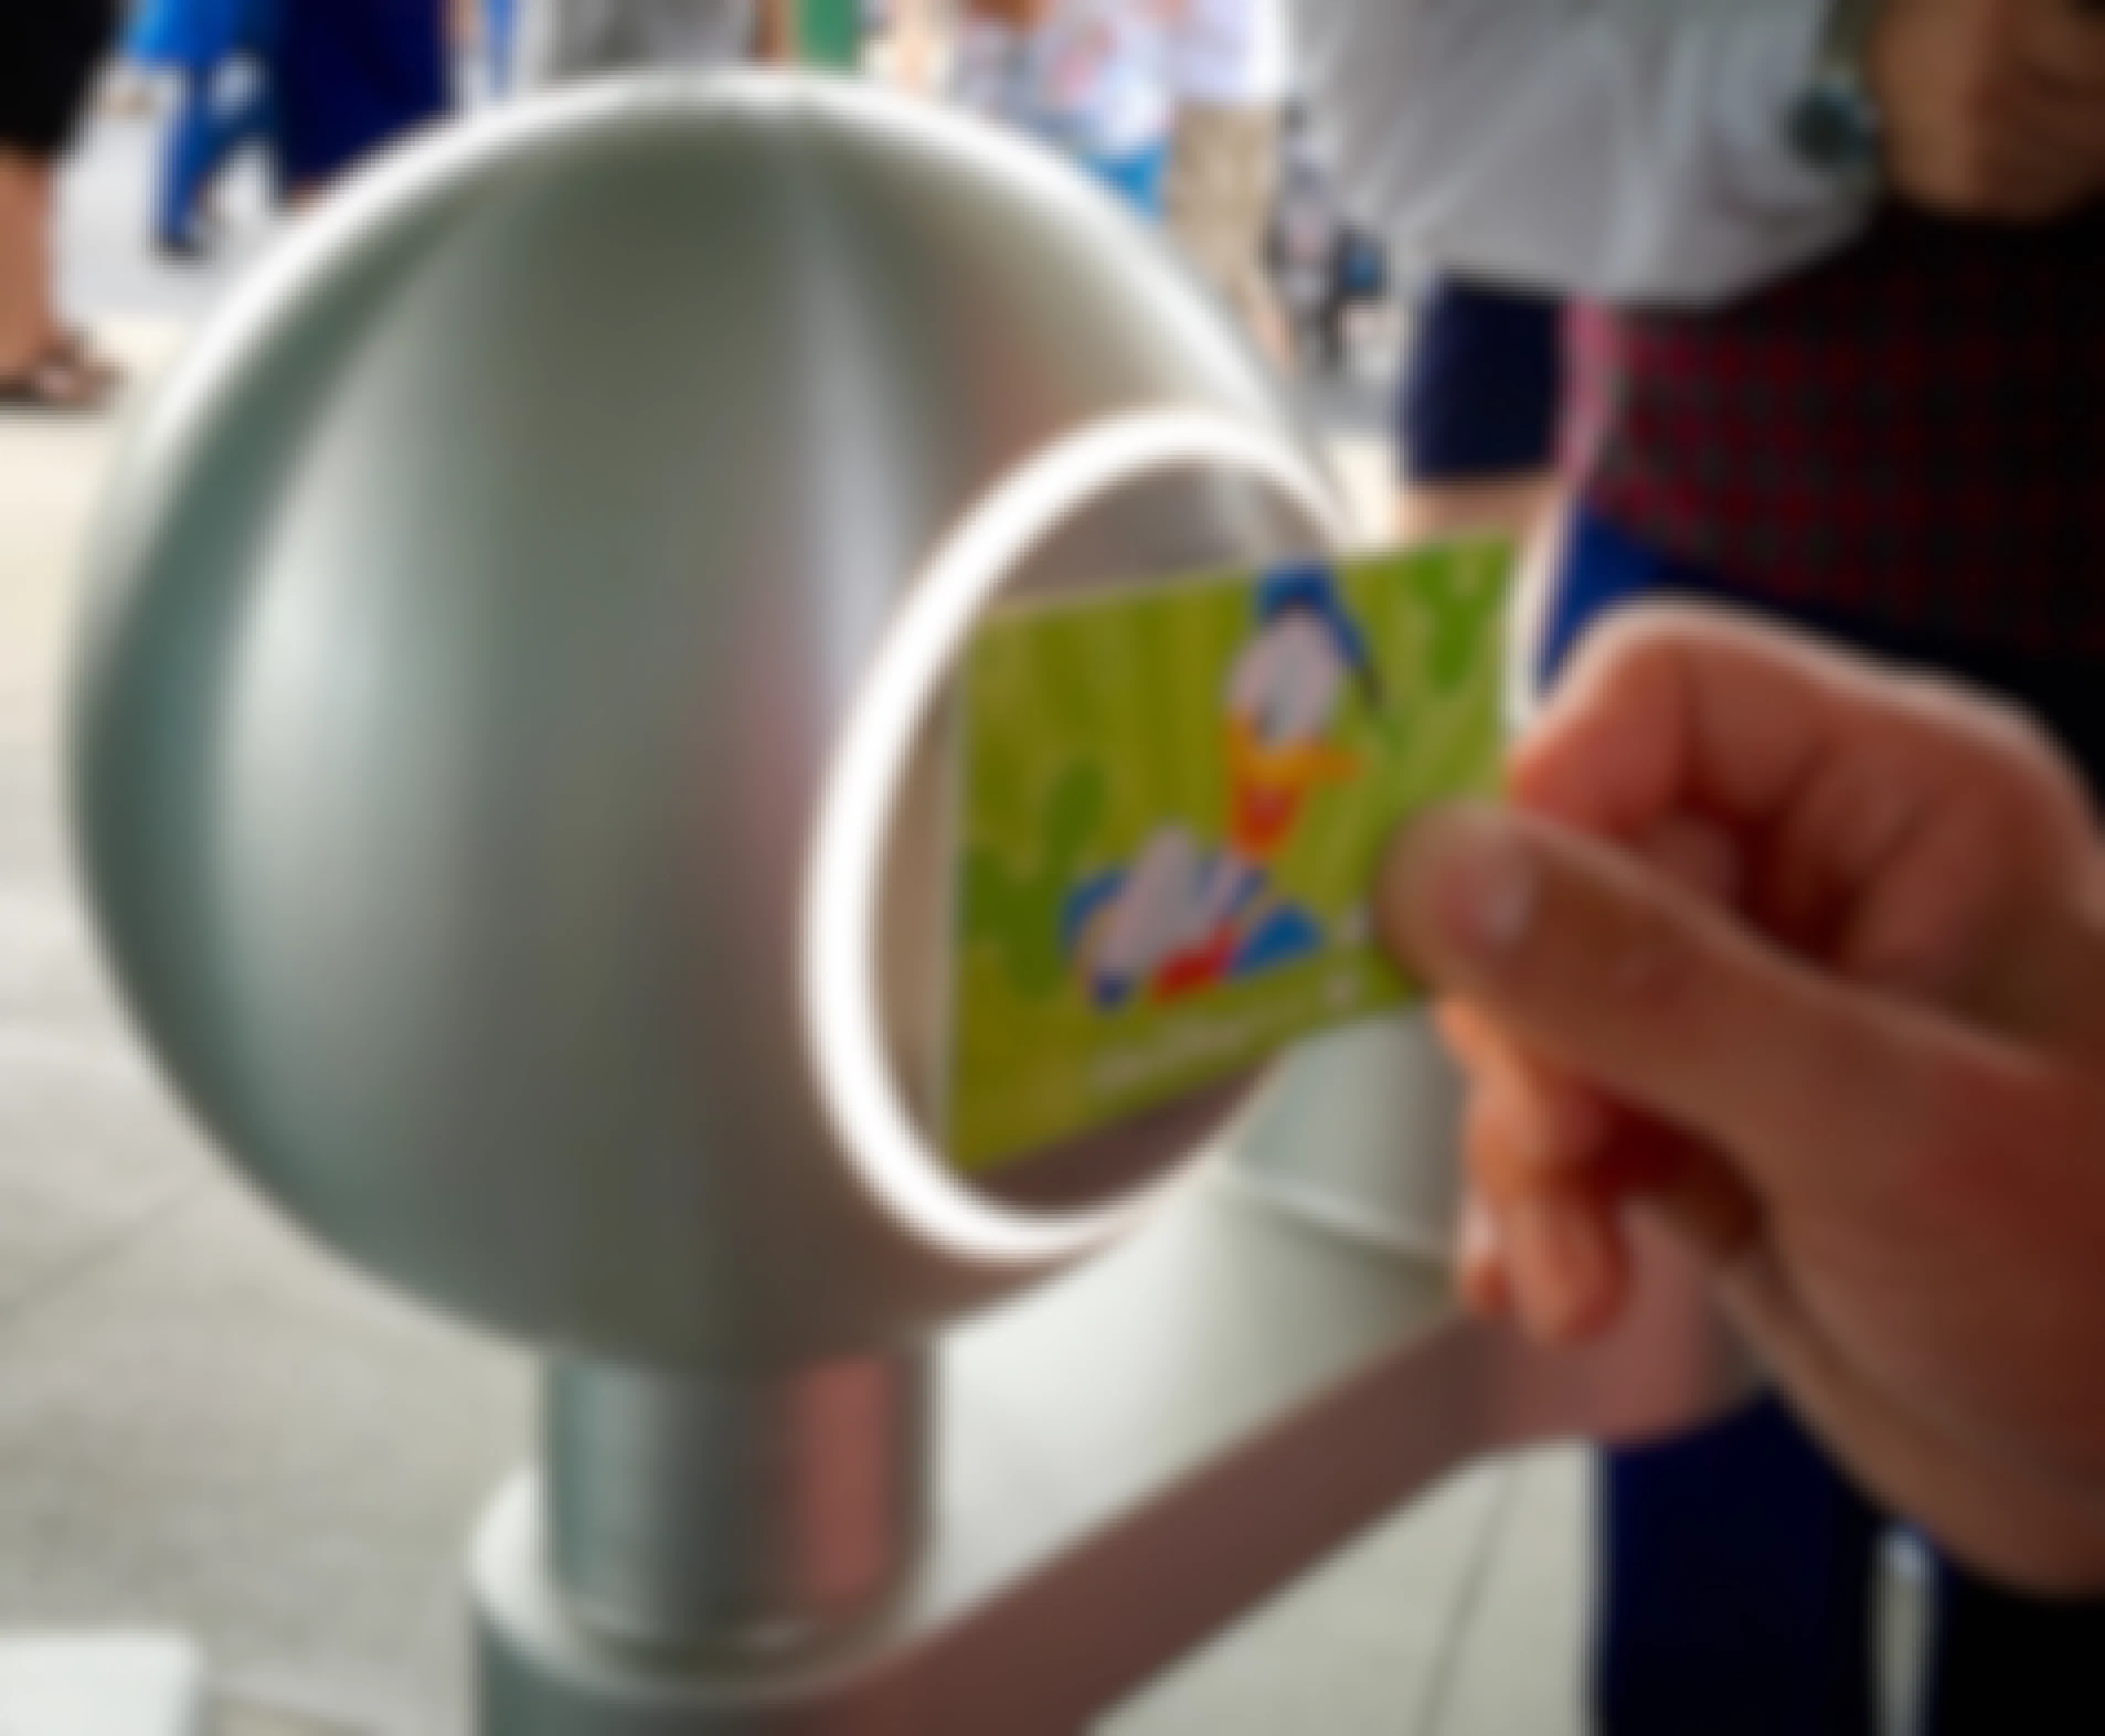 A person scanning their Disney pass card at a scanner in the Disney World park.